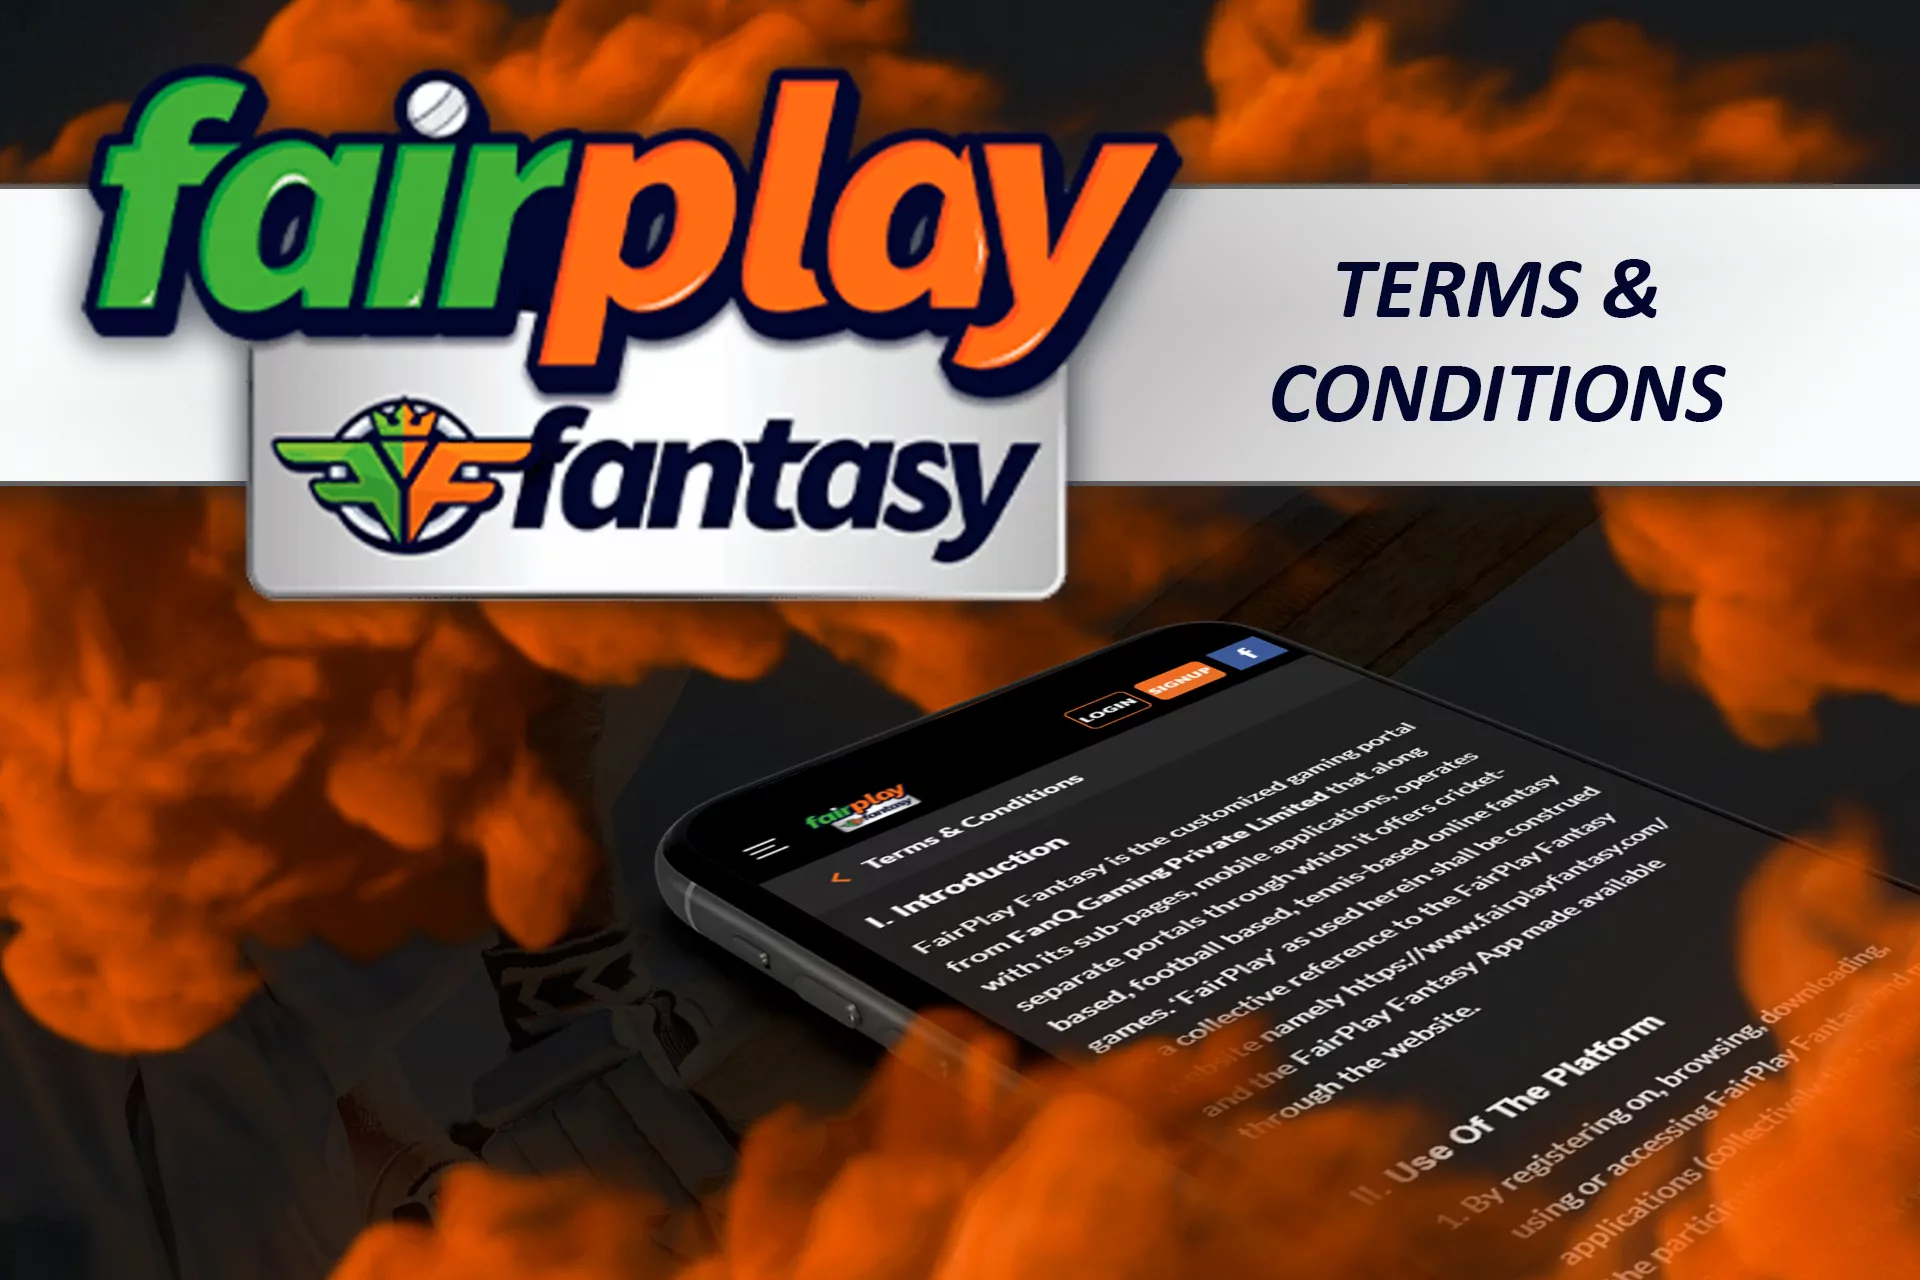 The terms and conditions for the using of the Fairplay Fantasy app are the same as for the usual Fairplay app.